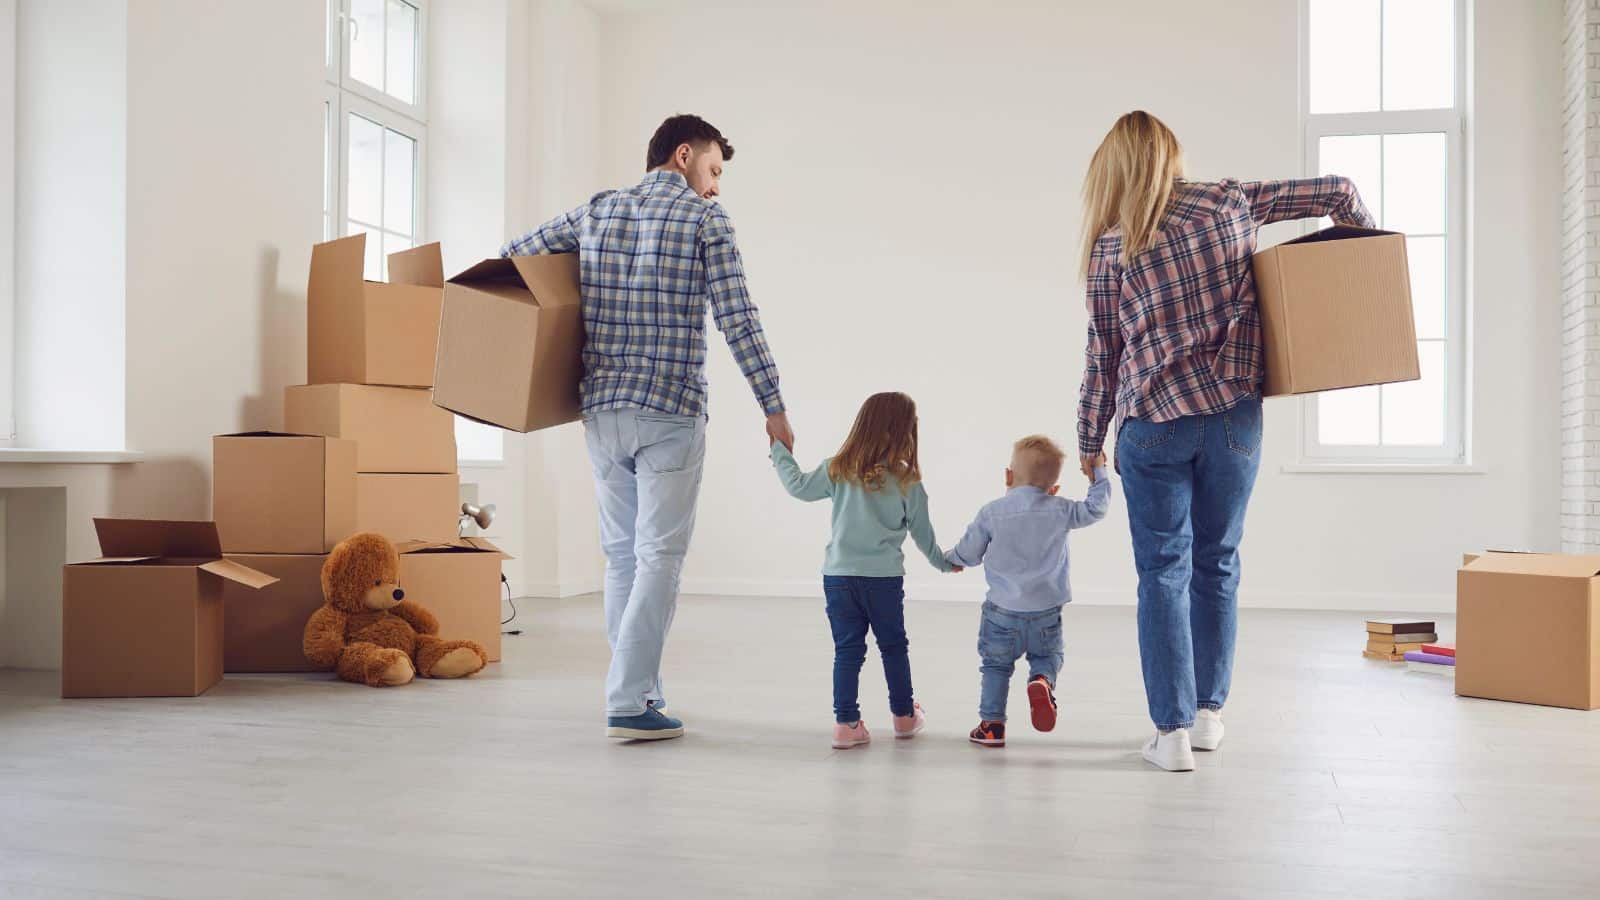 Family carrying moving boxes out of a home